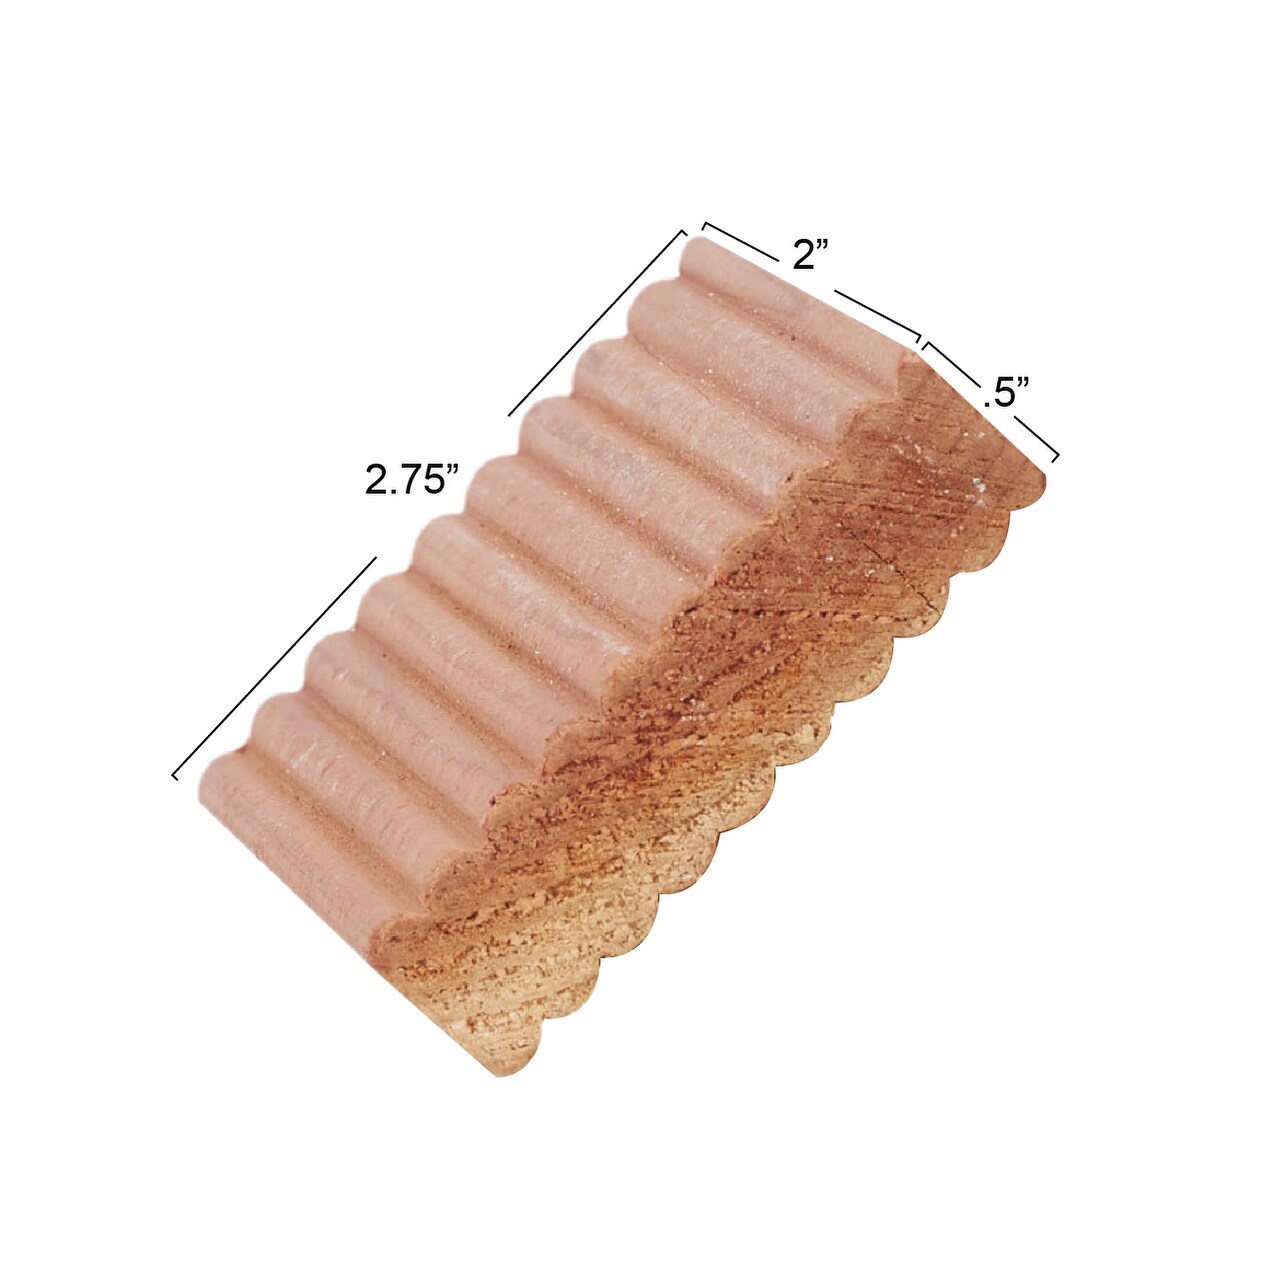 https://ak1.ostkcdn.com/images/products/is/images/direct/6f4b004ca5cf68c4fe84f9b6c87edc8be6305117/Cedar-Fresh-Cedar-Blocks%2C-4-Pack.jpg